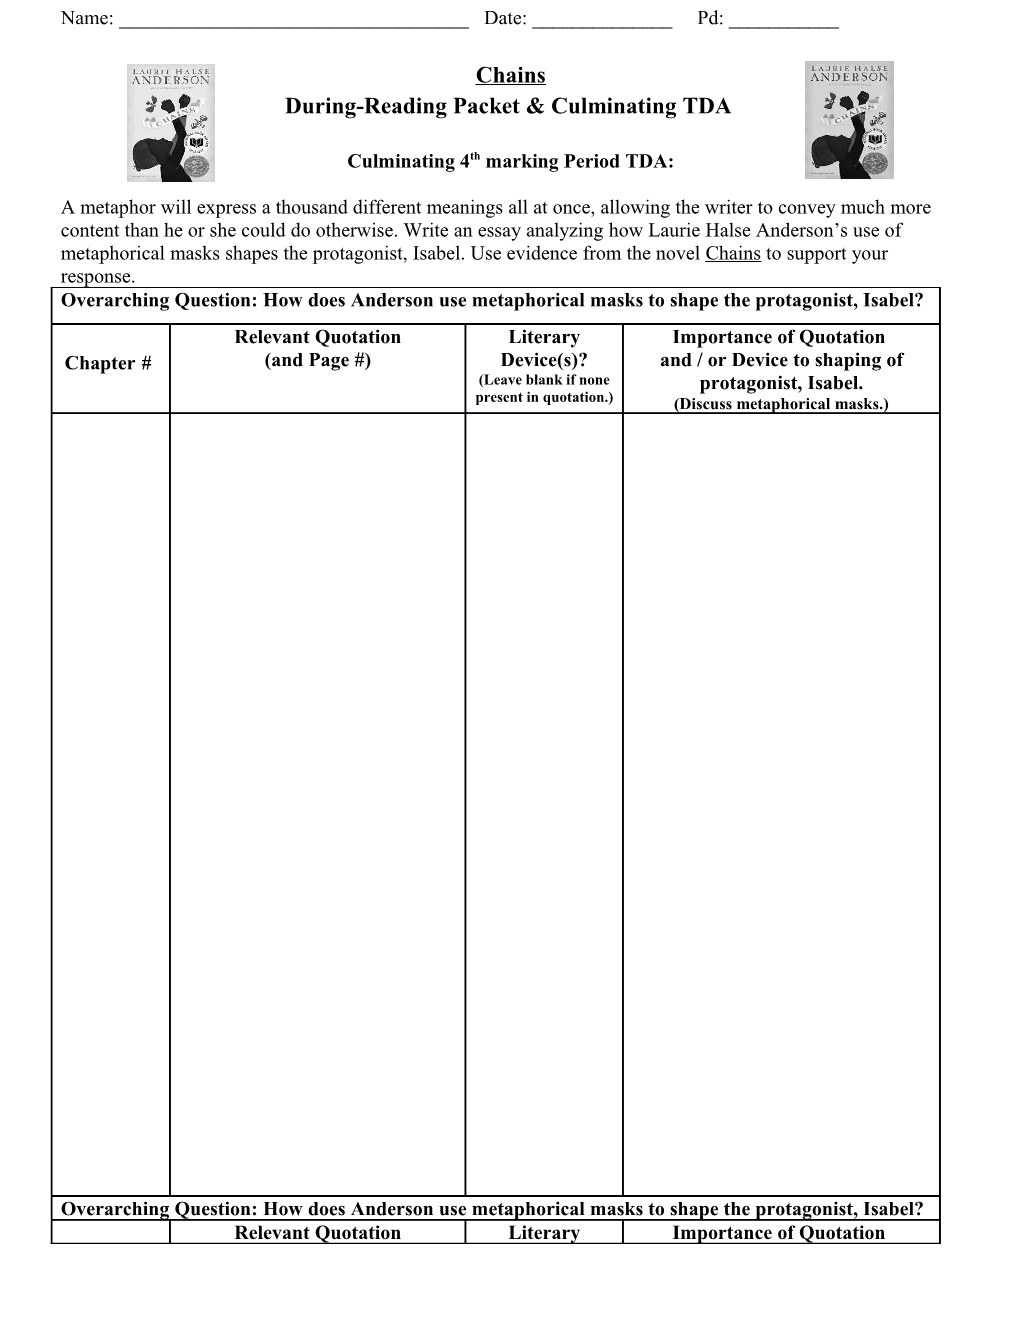 Chainsduring-Reading Packet & Culminating TDA